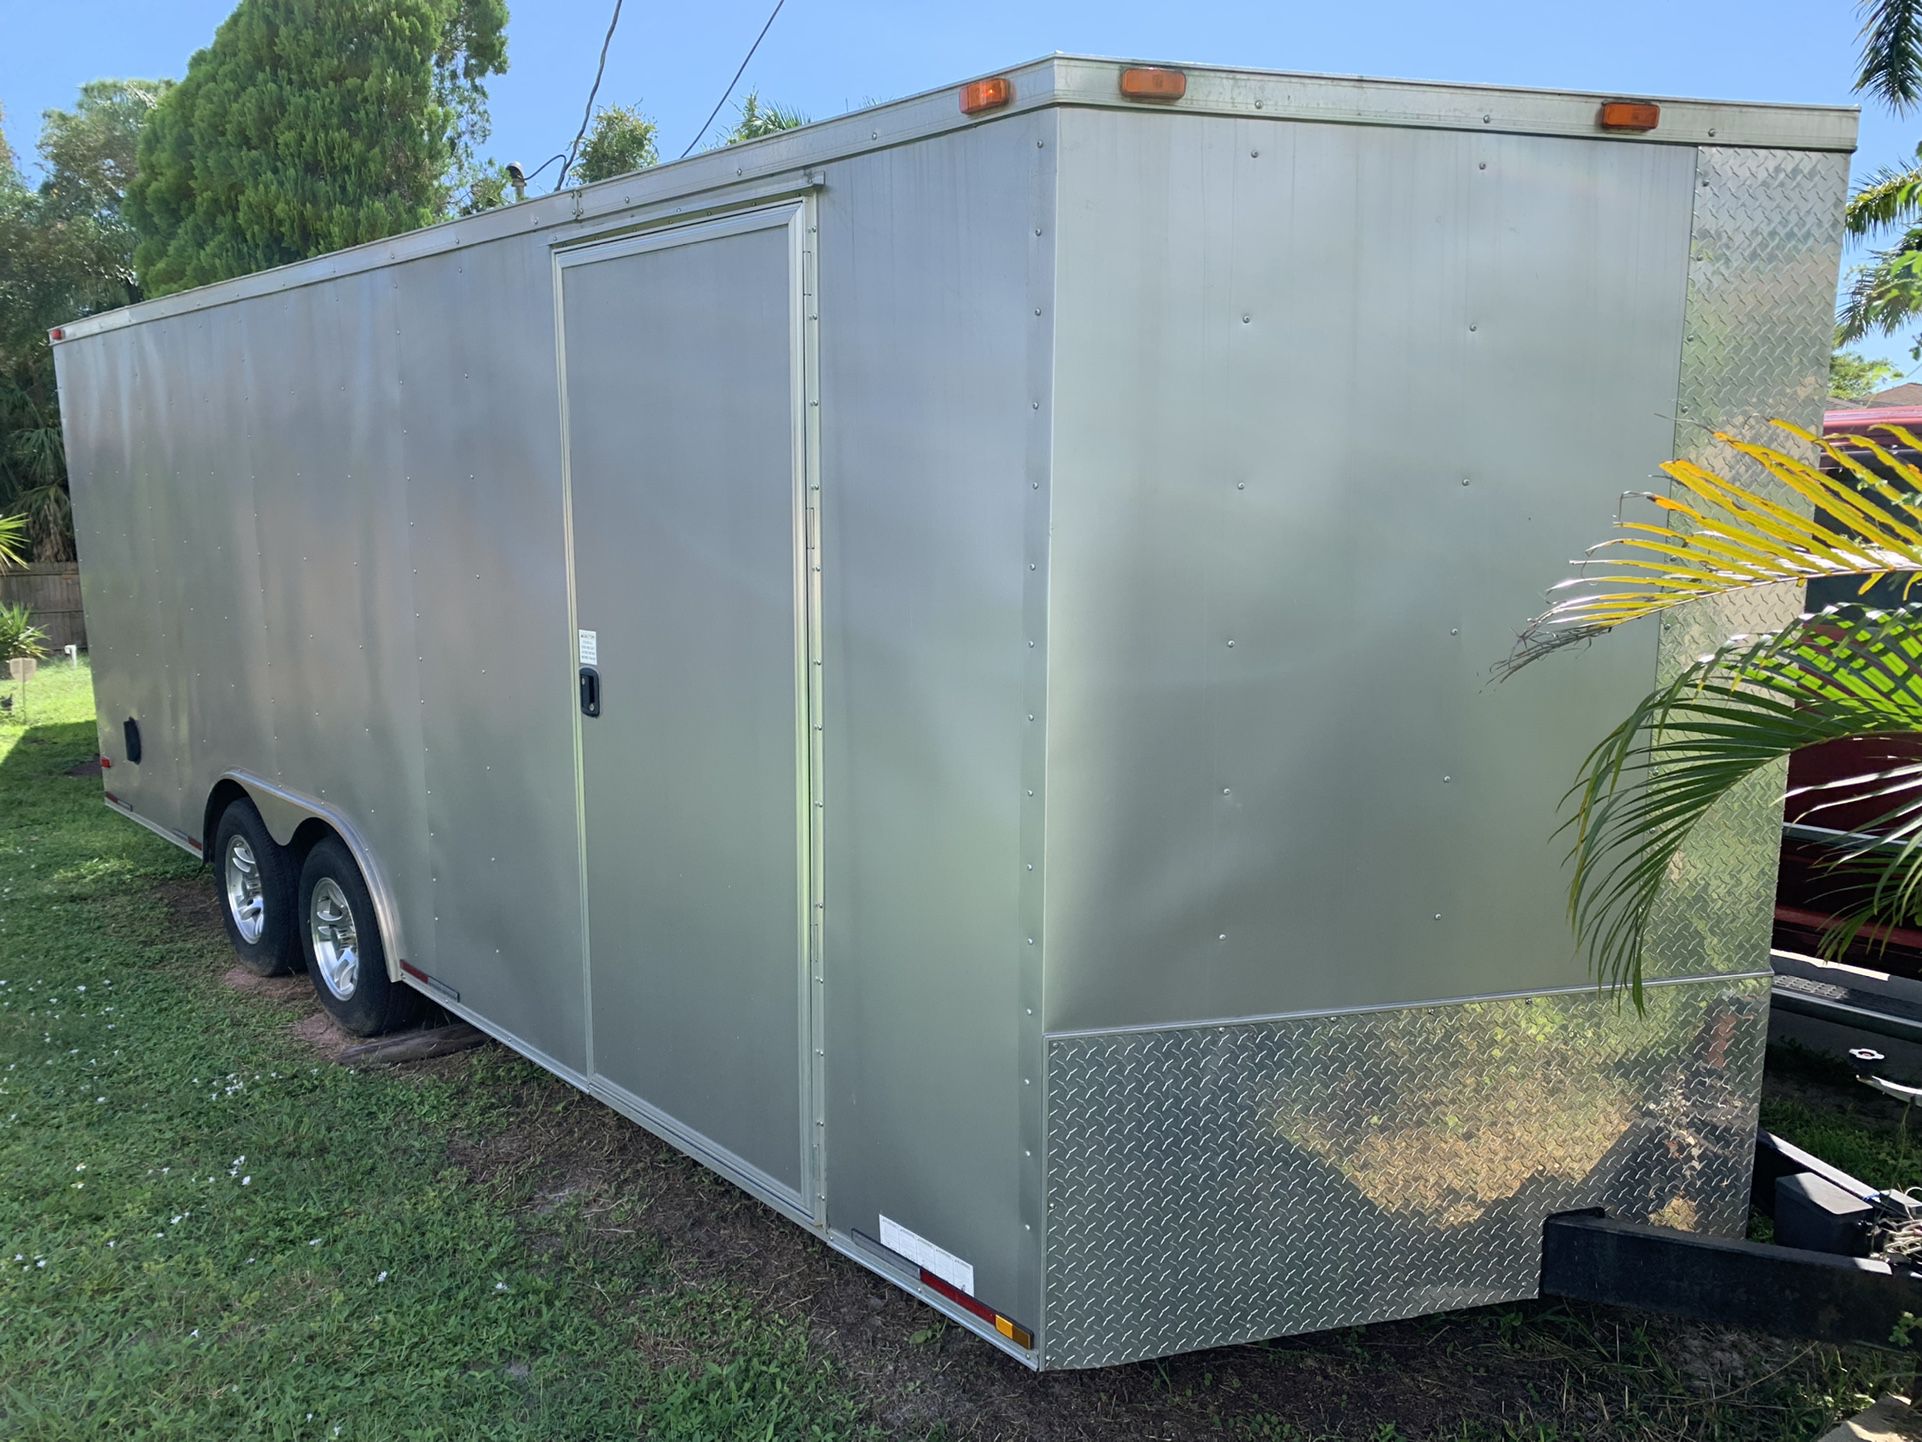 Enclosed trailer great for hauling cars motorcycles or precious cargo 8000 or best offer comes with upgraded tires and rims as well as two otheo other